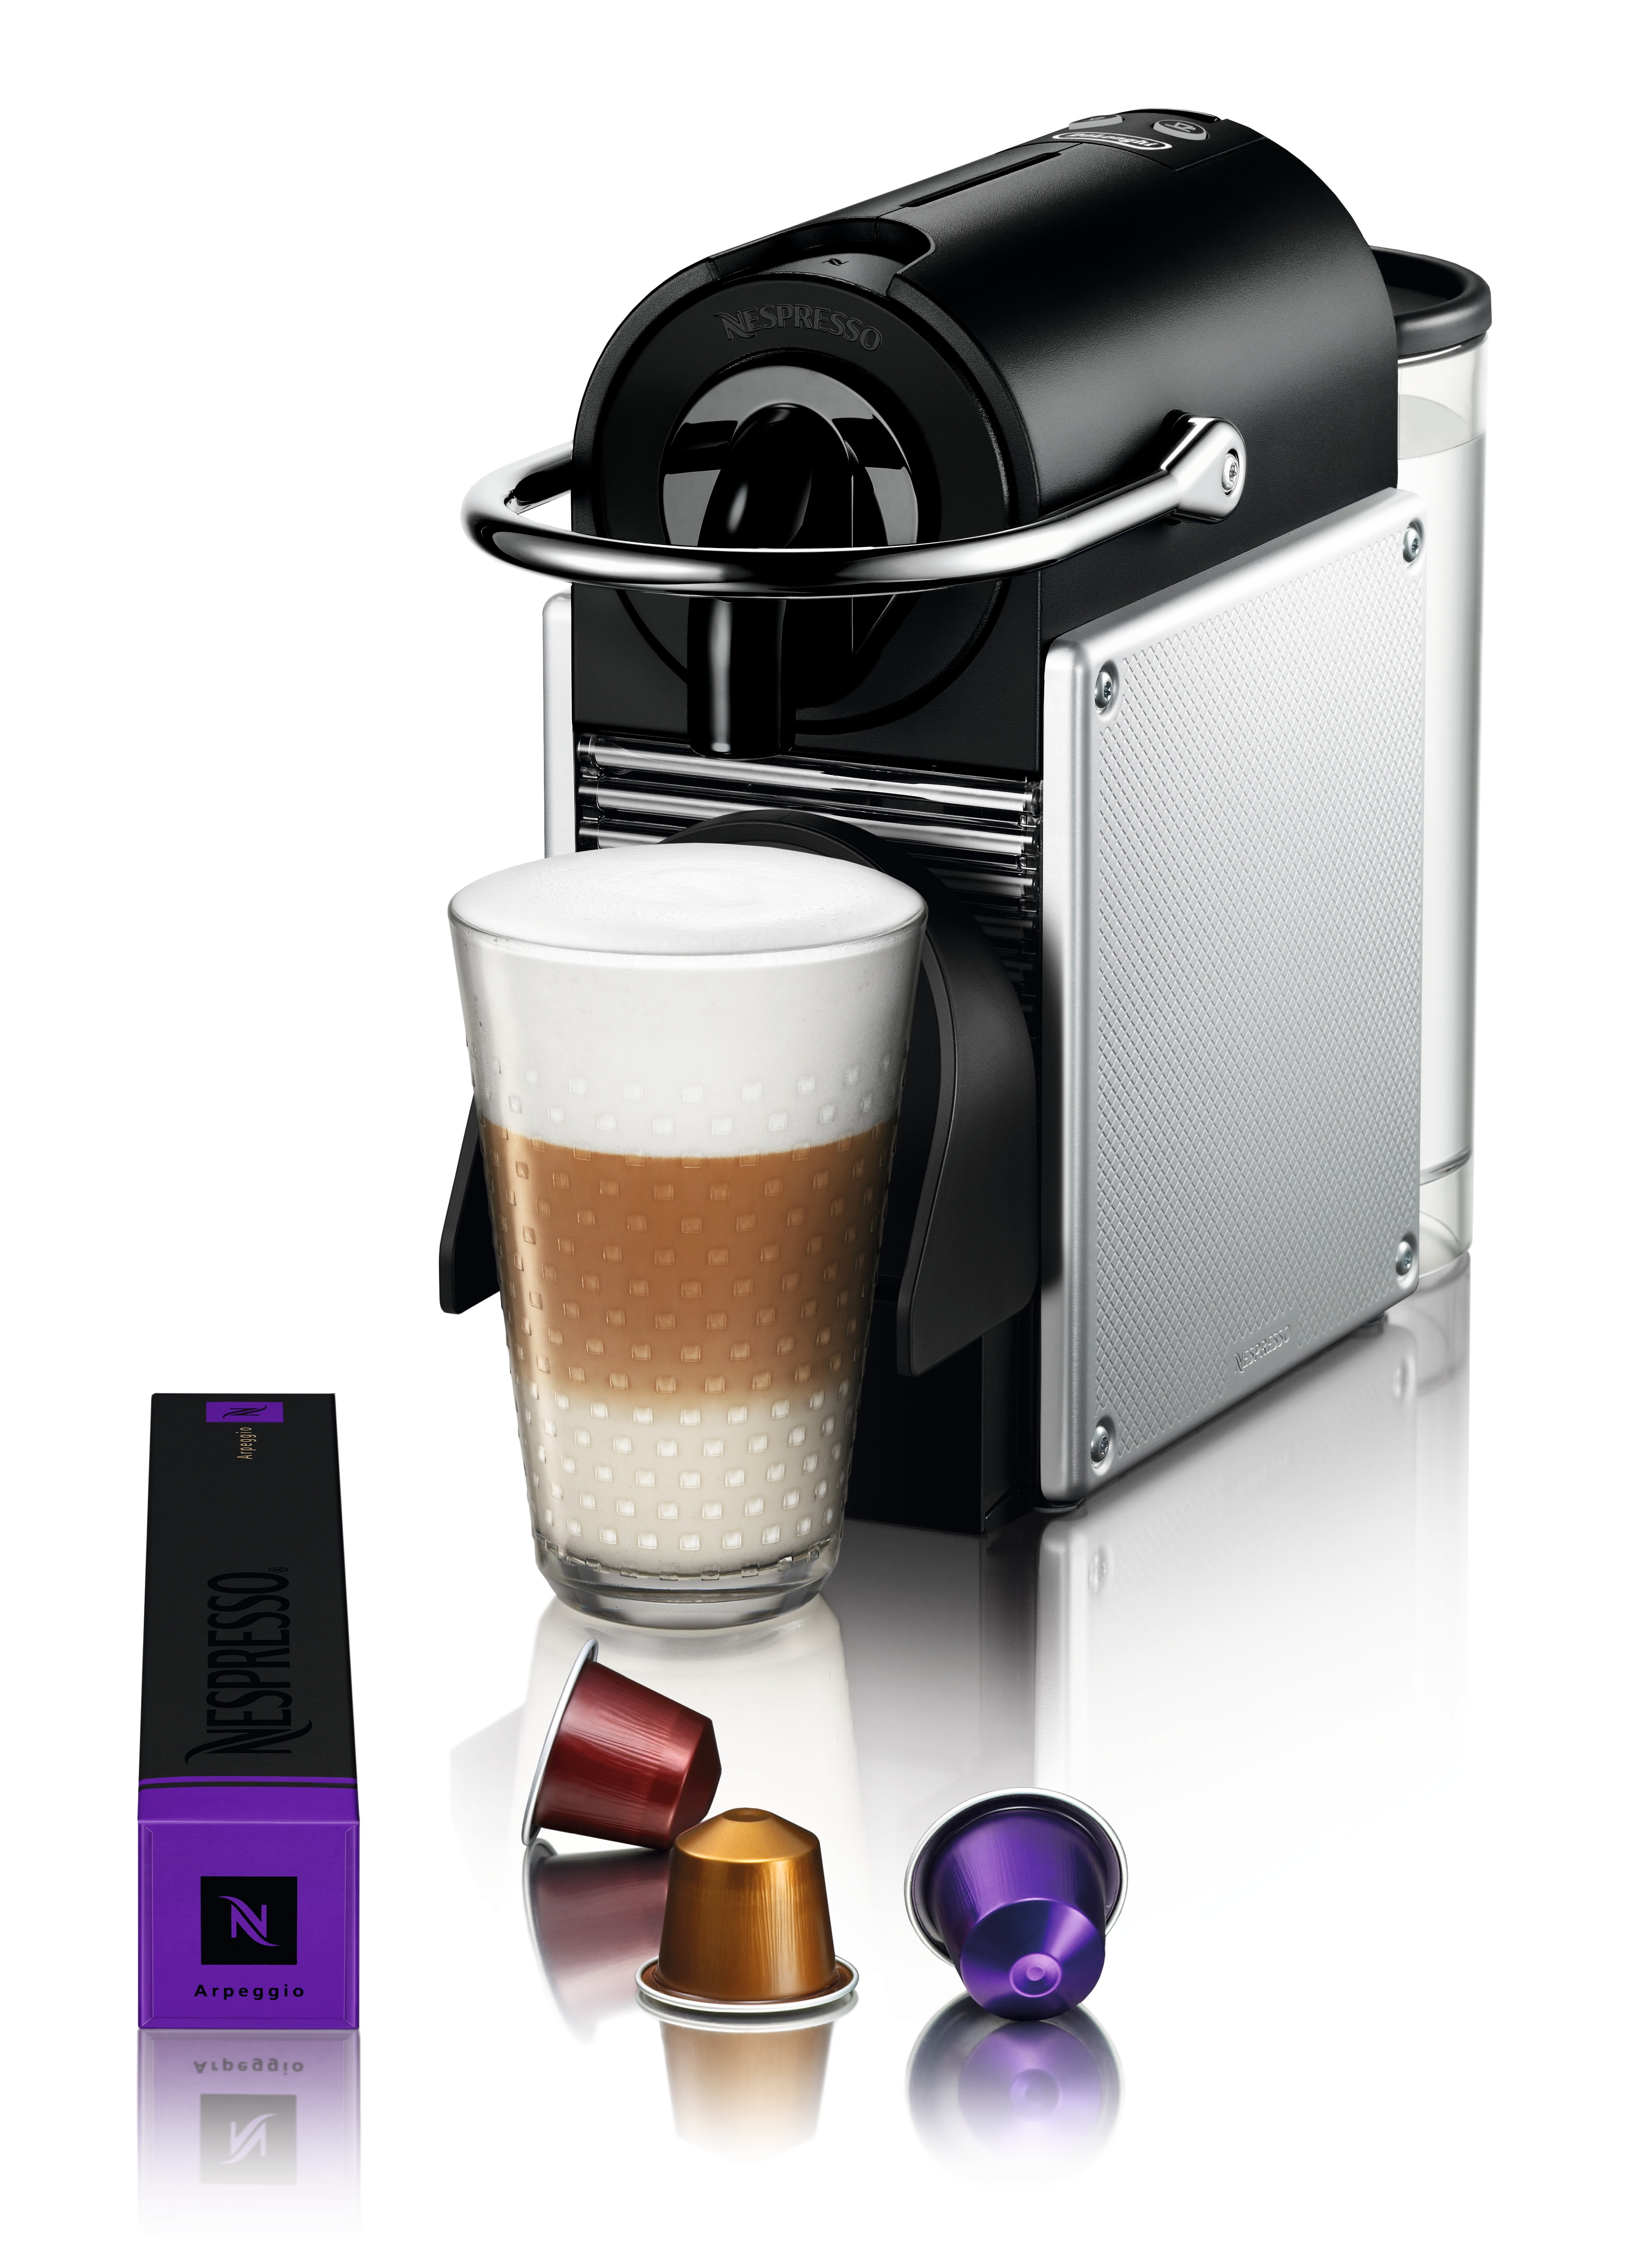 Nespresso's Pint-Size Pixie Machine is Made of Recycled Coffee Capsules